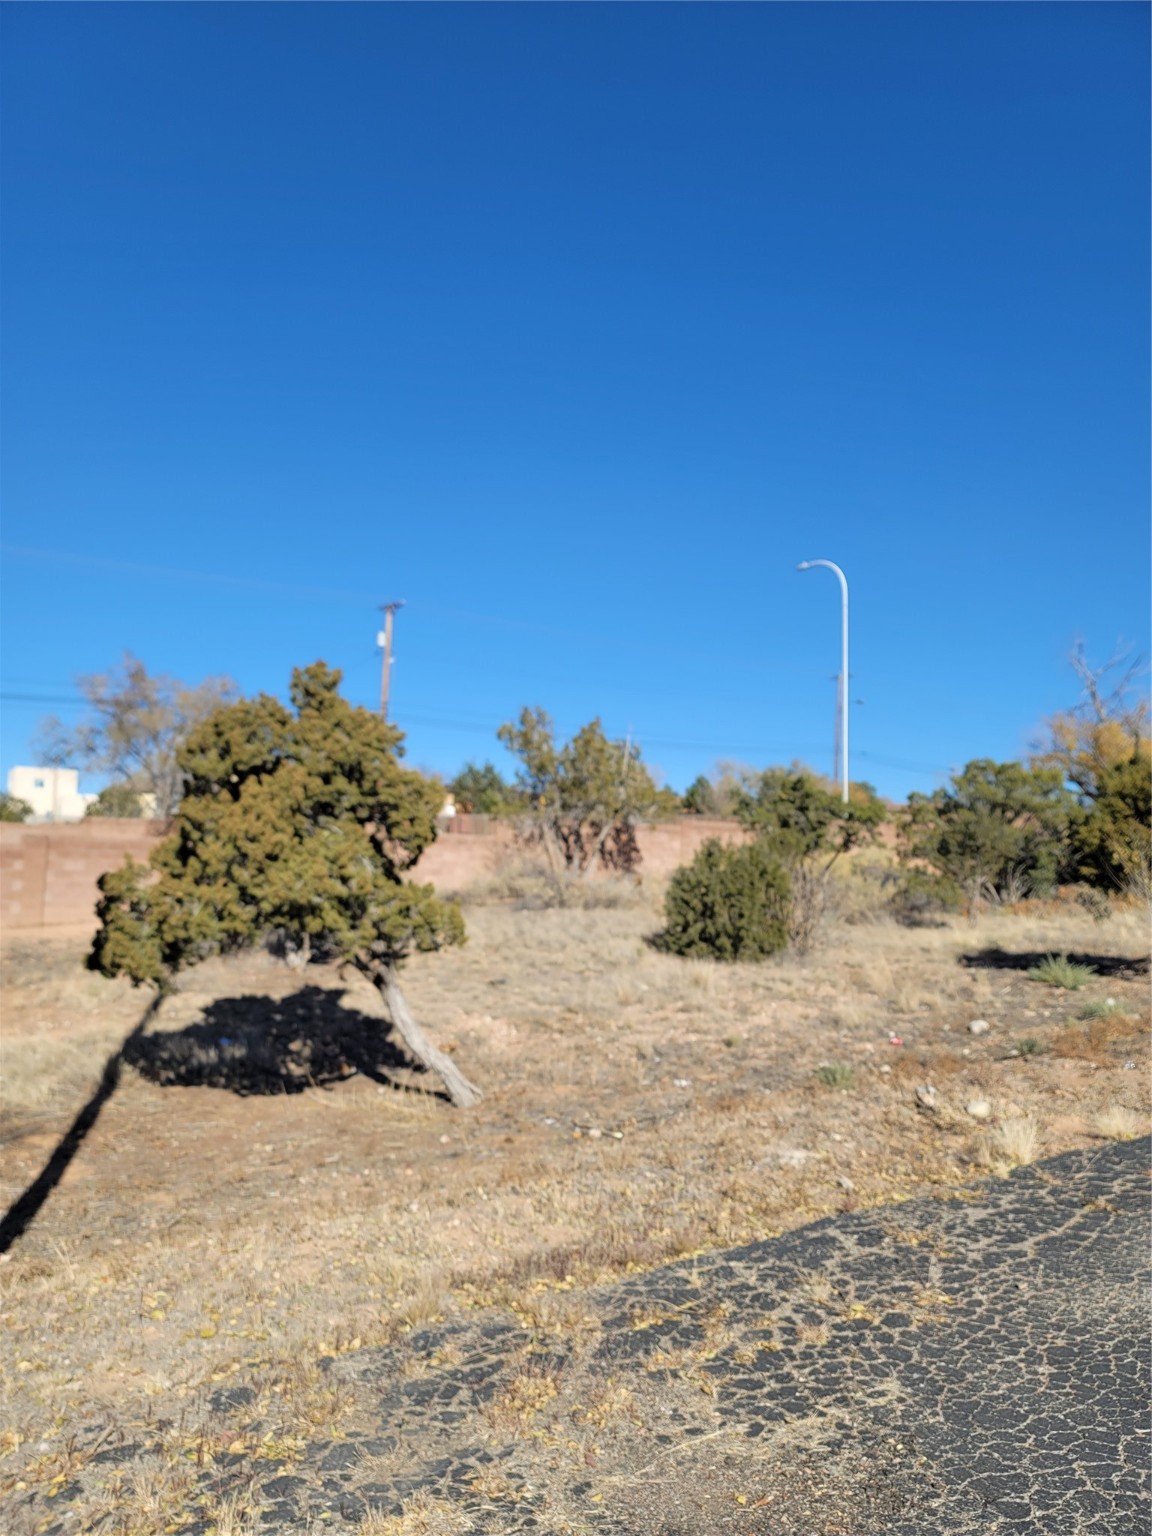 3924 Rodeo Road, Santa Fe, New Mexico 87507, ,Commercial Sale,For Sale,3924 Rodeo Road,202341733